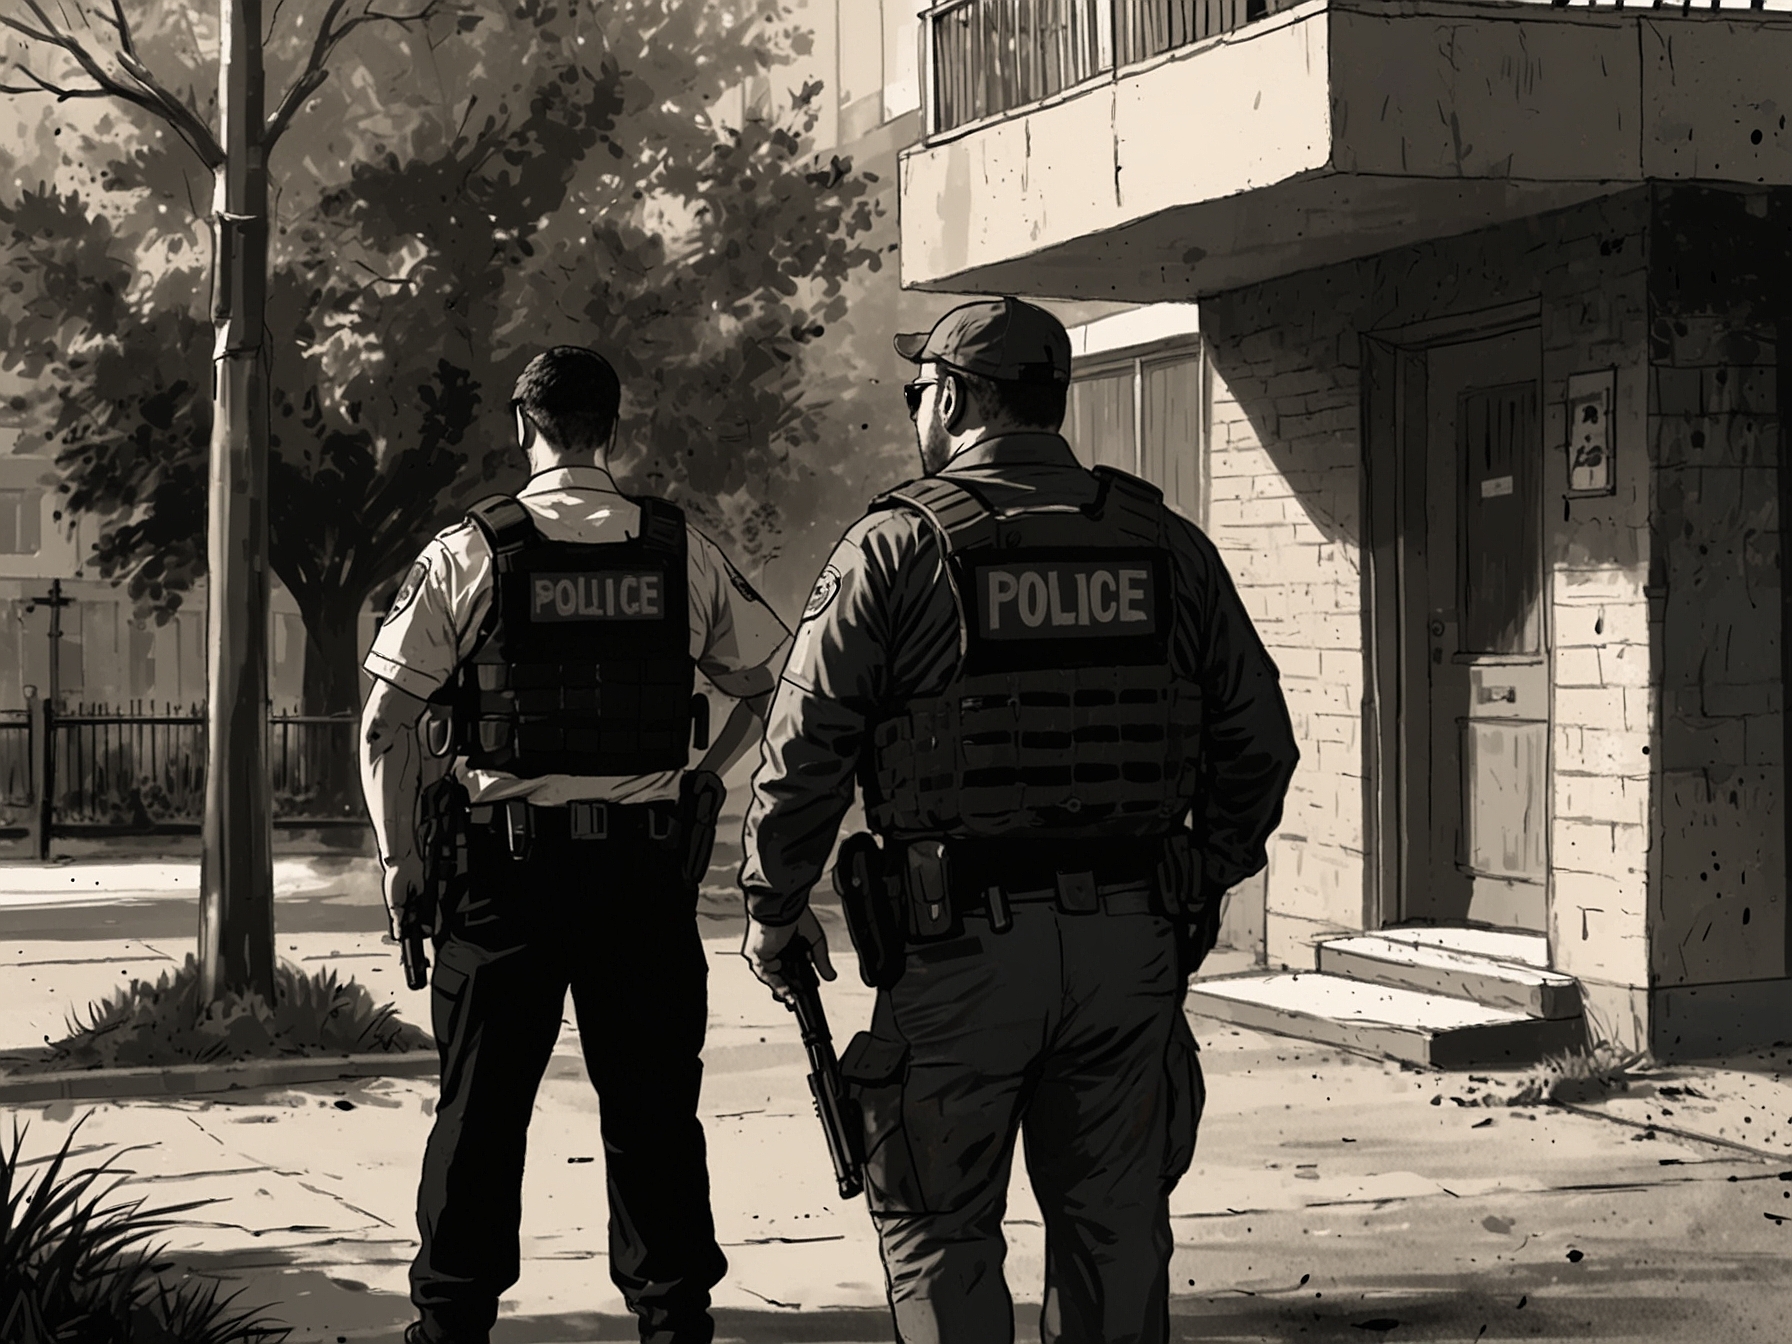 An officer detaining a man wearing a tactical vest in a restricted area near the police headquarters. This scene emphasizes the quick response and professionalism of the police force in handling unexpected threats.